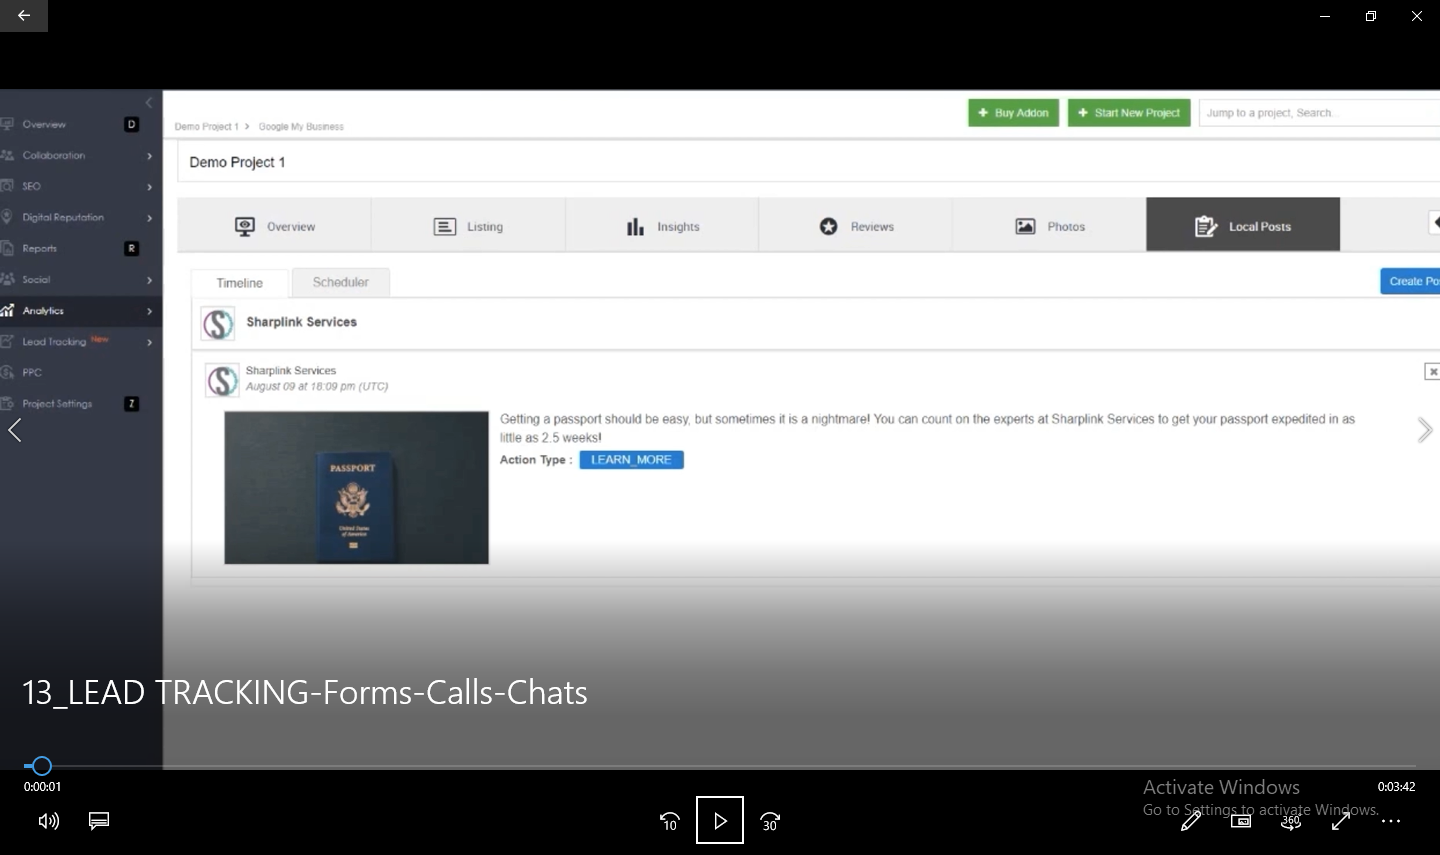 13_LEAD TRACKING-Forms-Calls-Chats-thumbnail